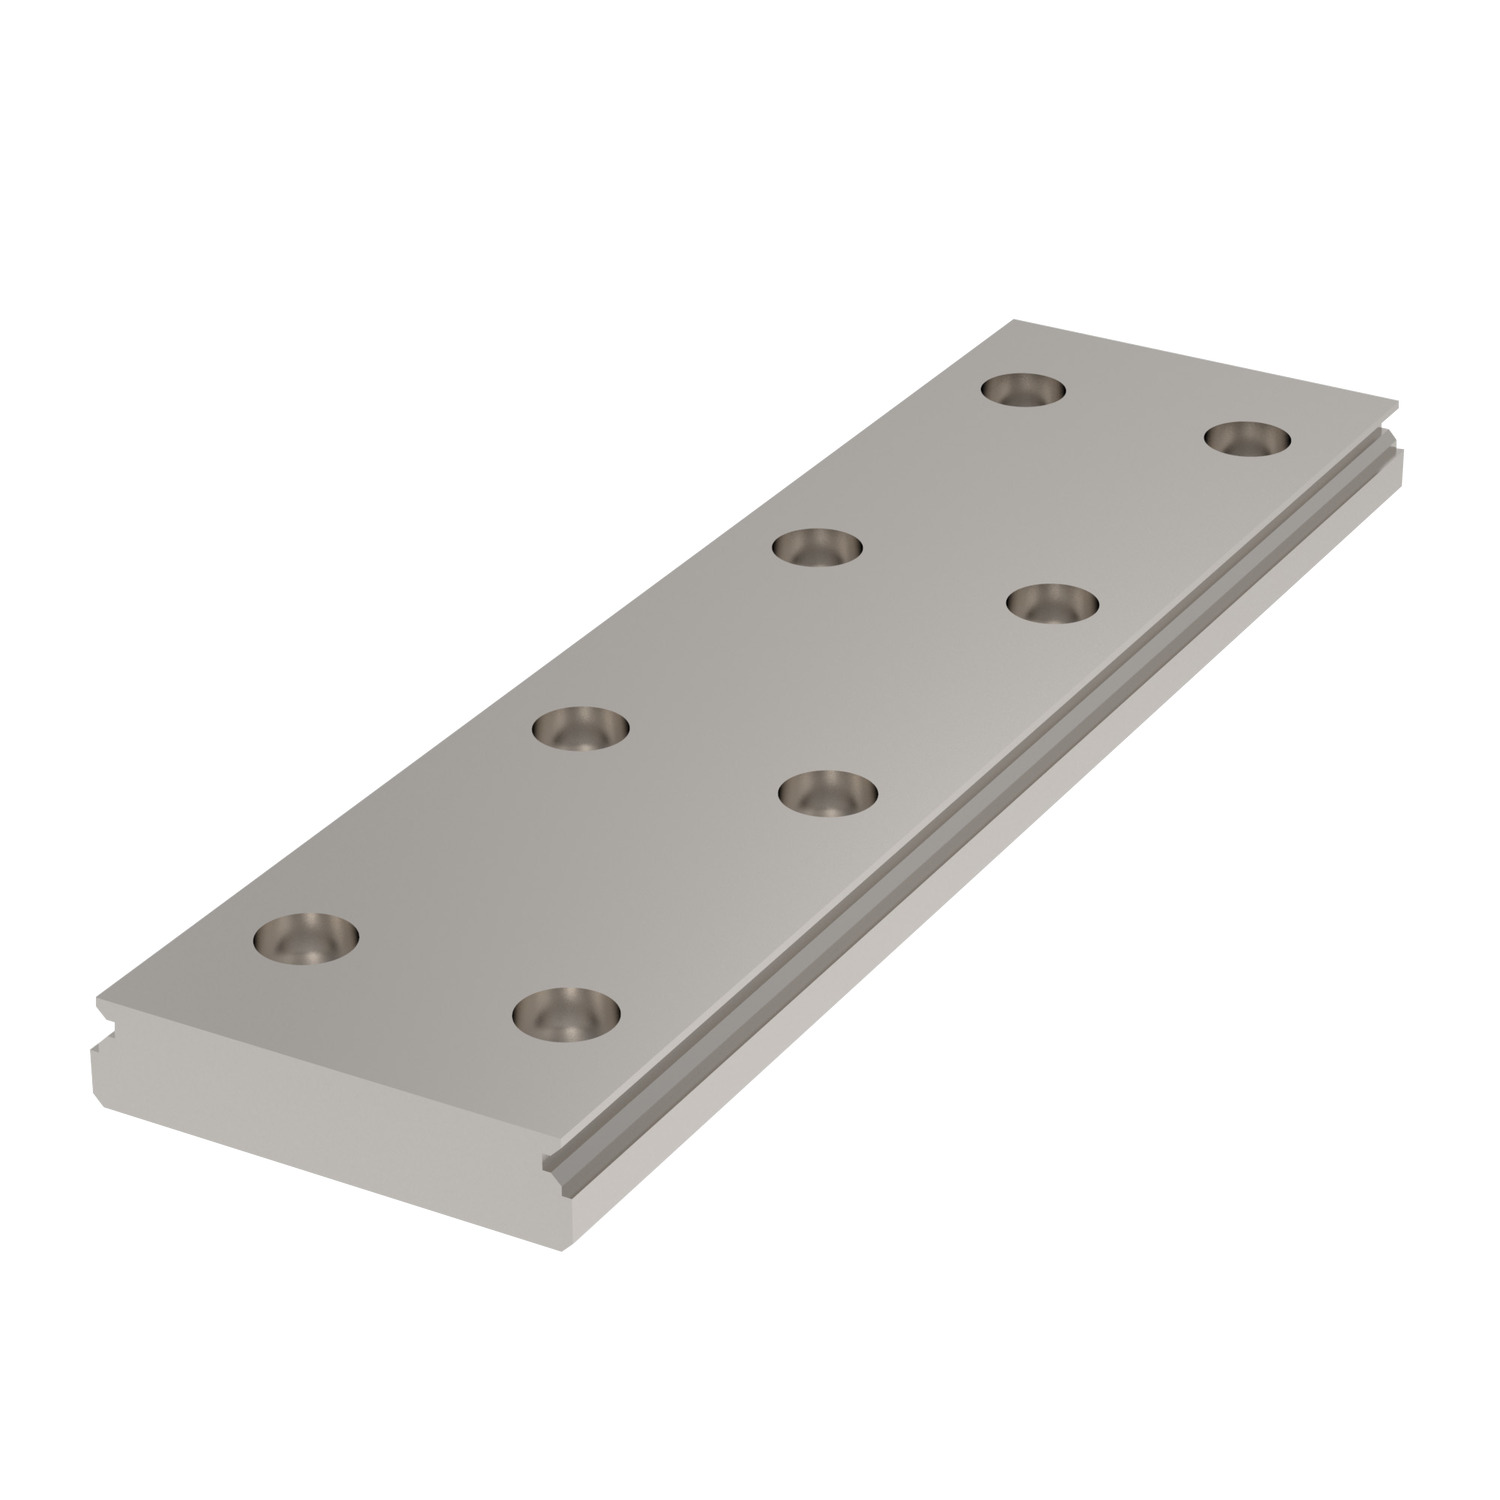 10mm Miniature Linear Rail 10mm miniature linear rails, wide version. Corrosion resistant stainless steel body. Other rail sizes available on request.